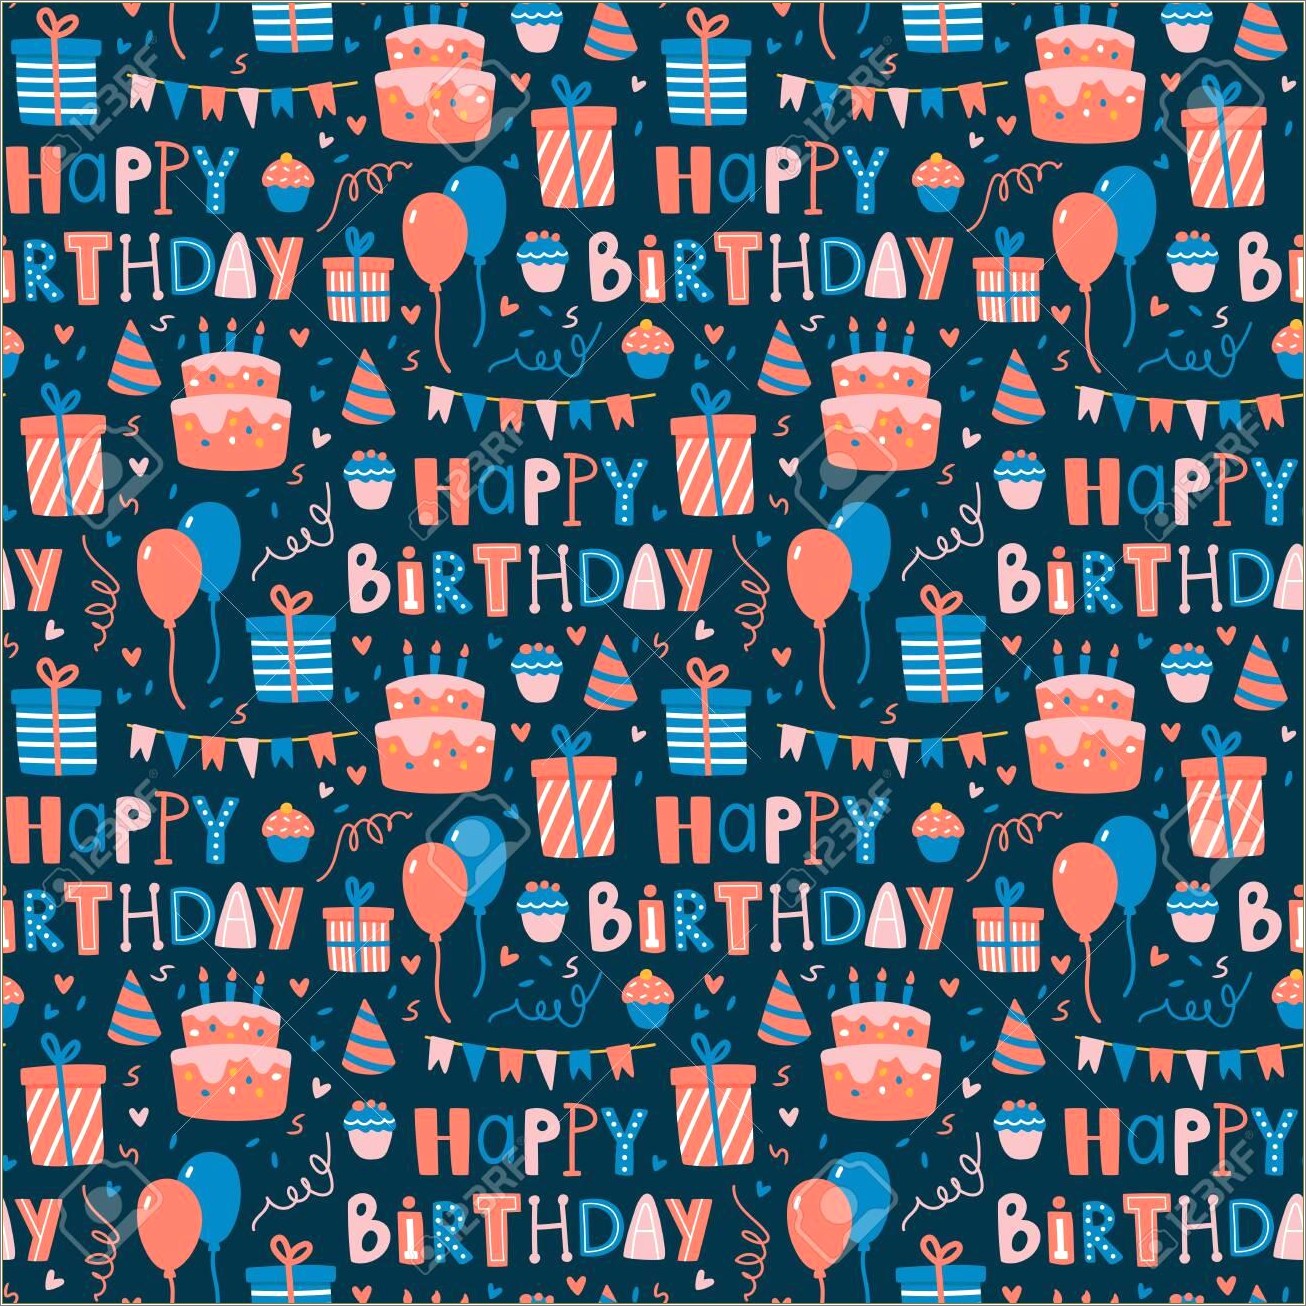 Free Printable Birthday Balloon Template With Text